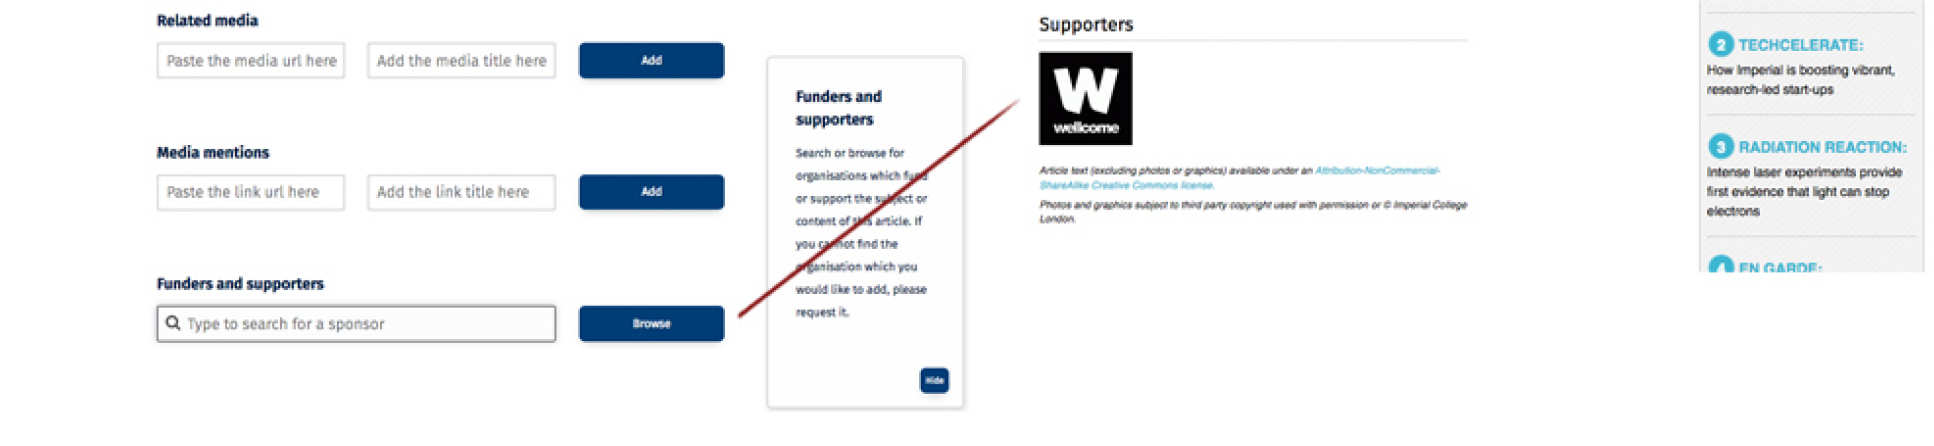 Funders and supporters screen